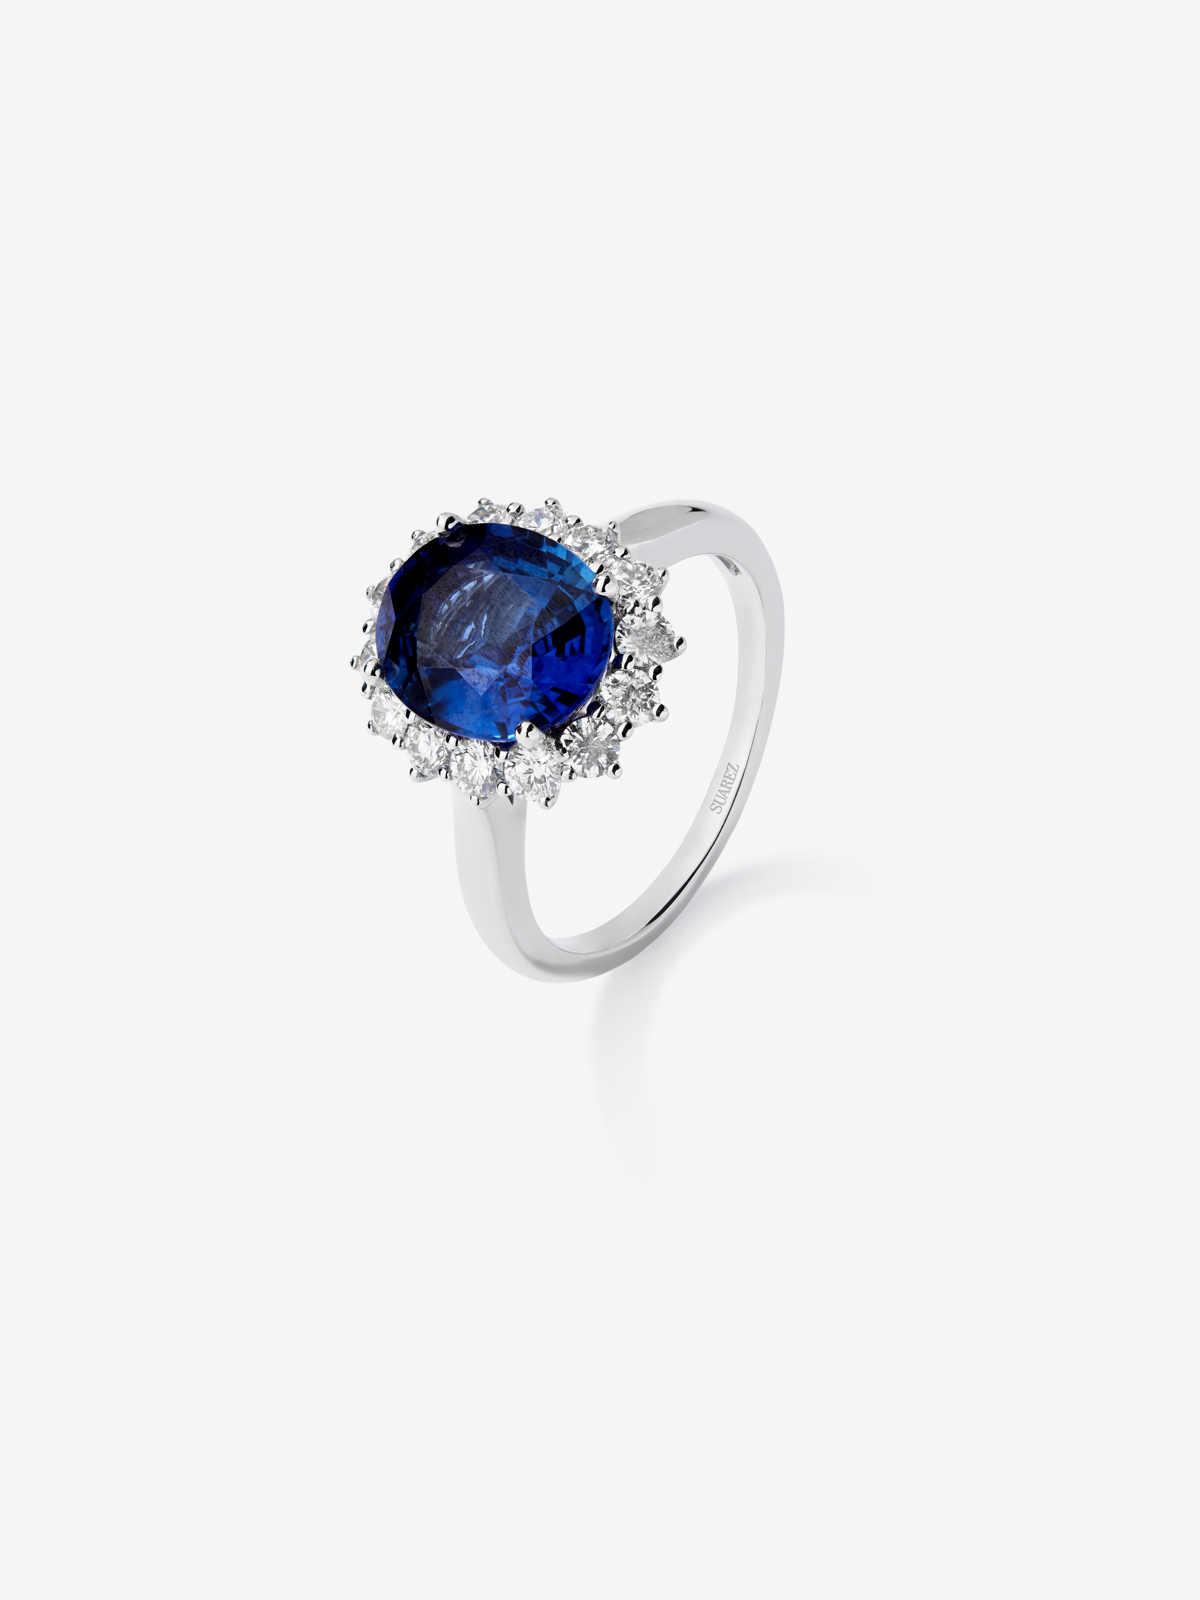 18K White Gold Ring with Azul Blue Sapping